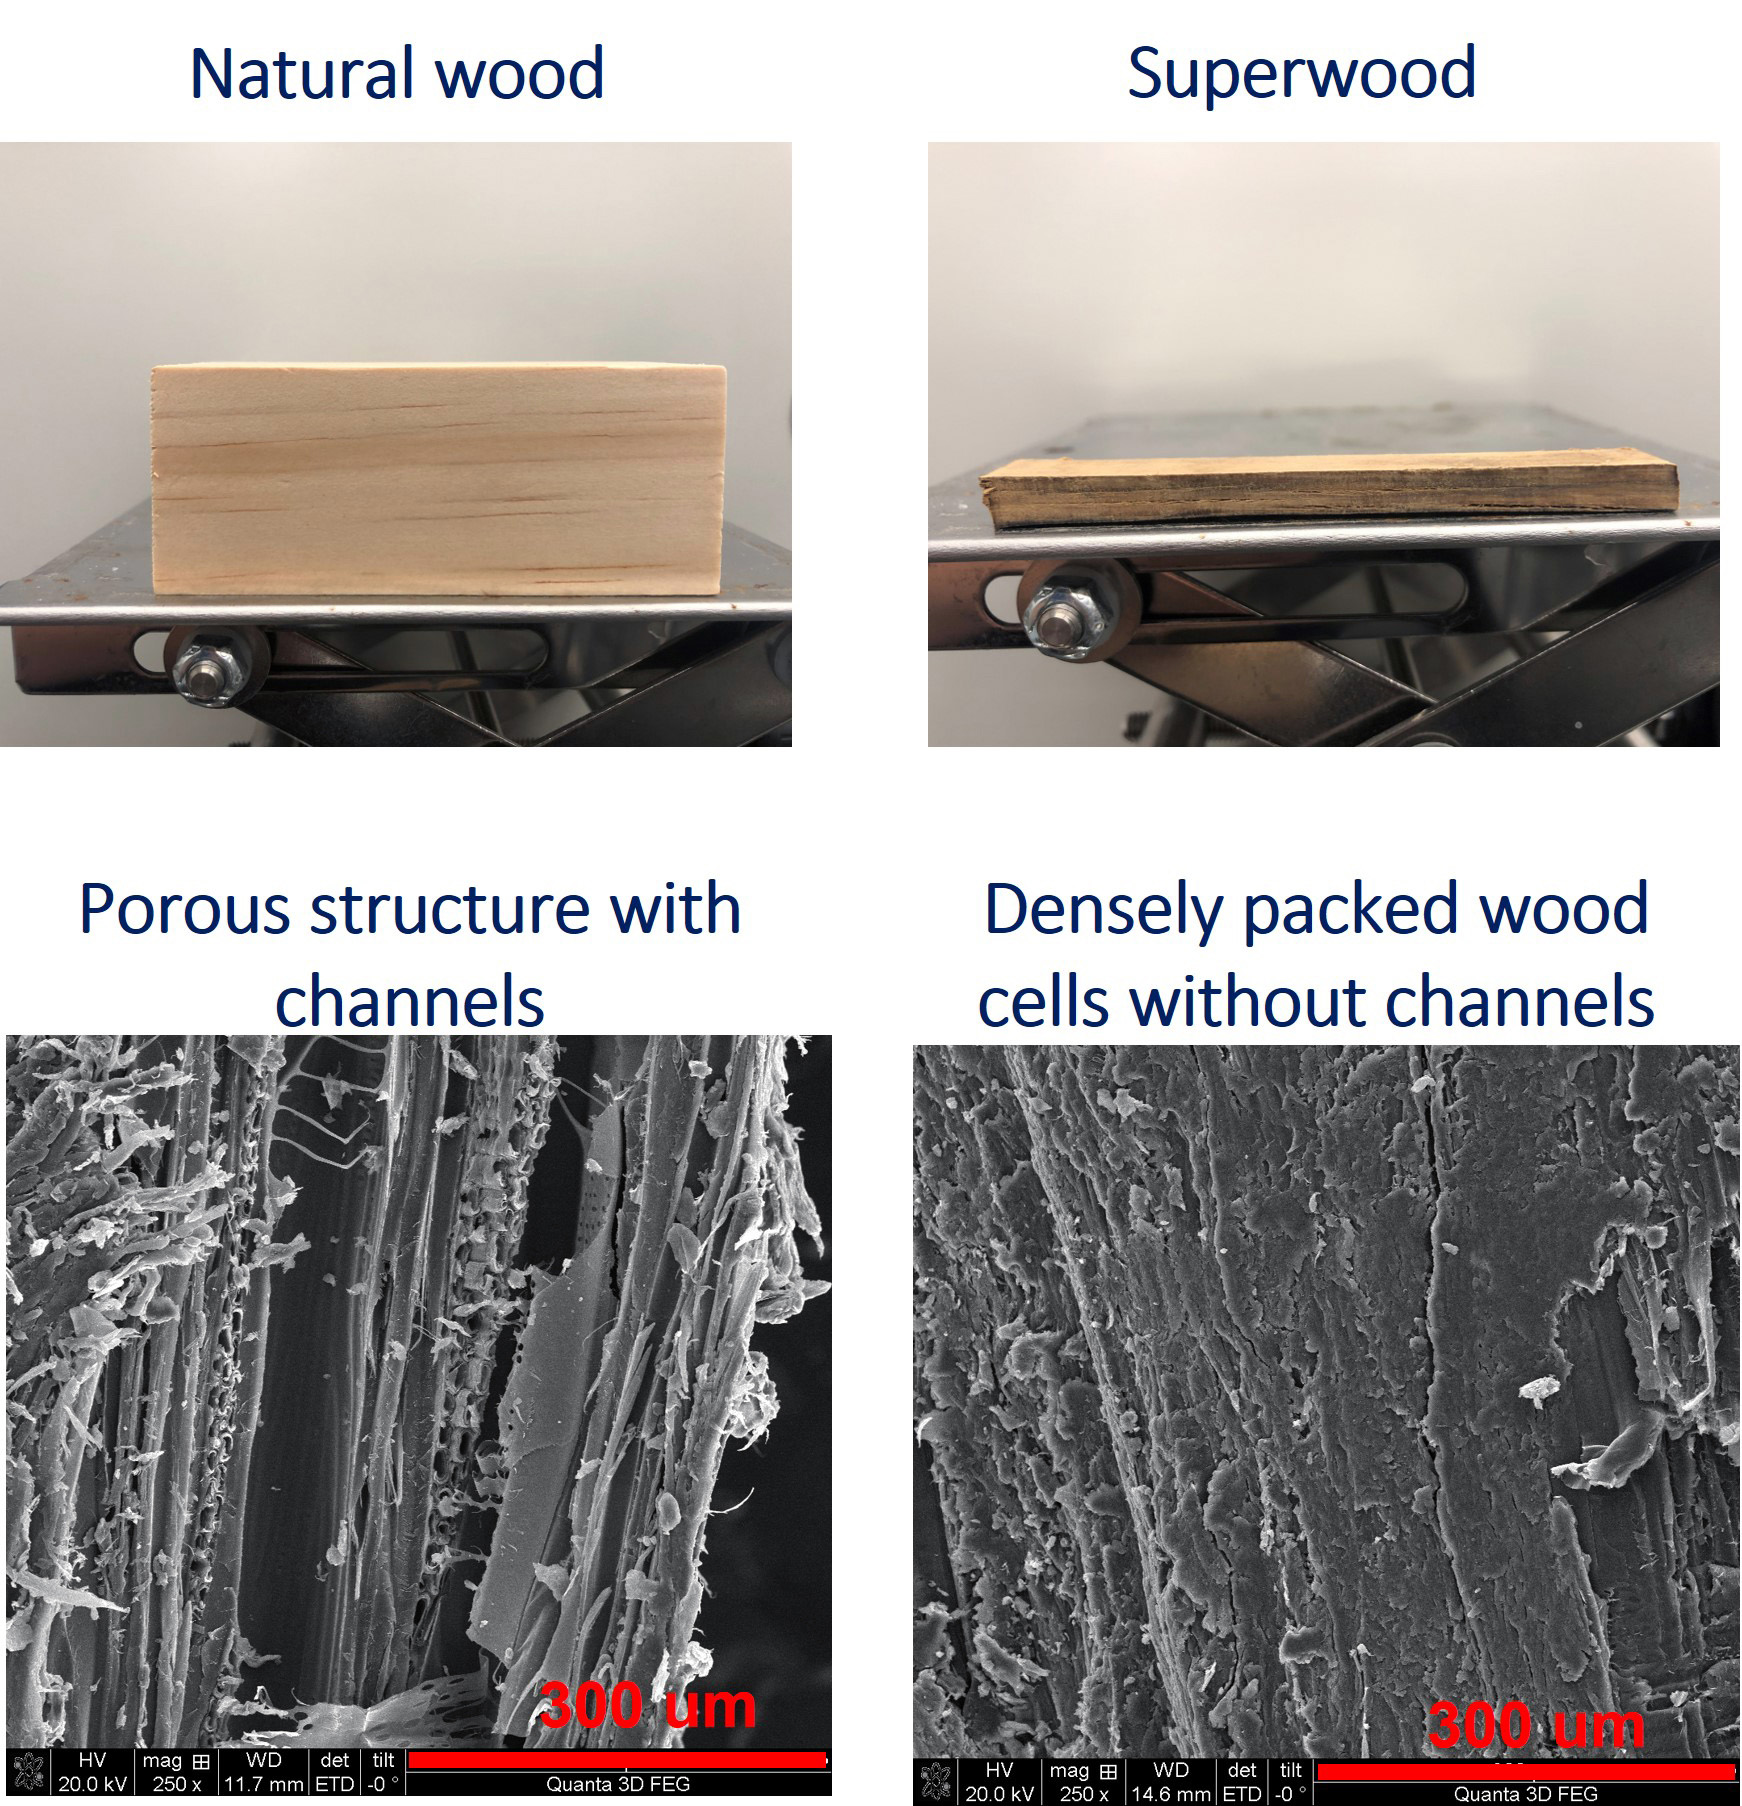 Graphic displaying the difference between natural wood versus superwood.